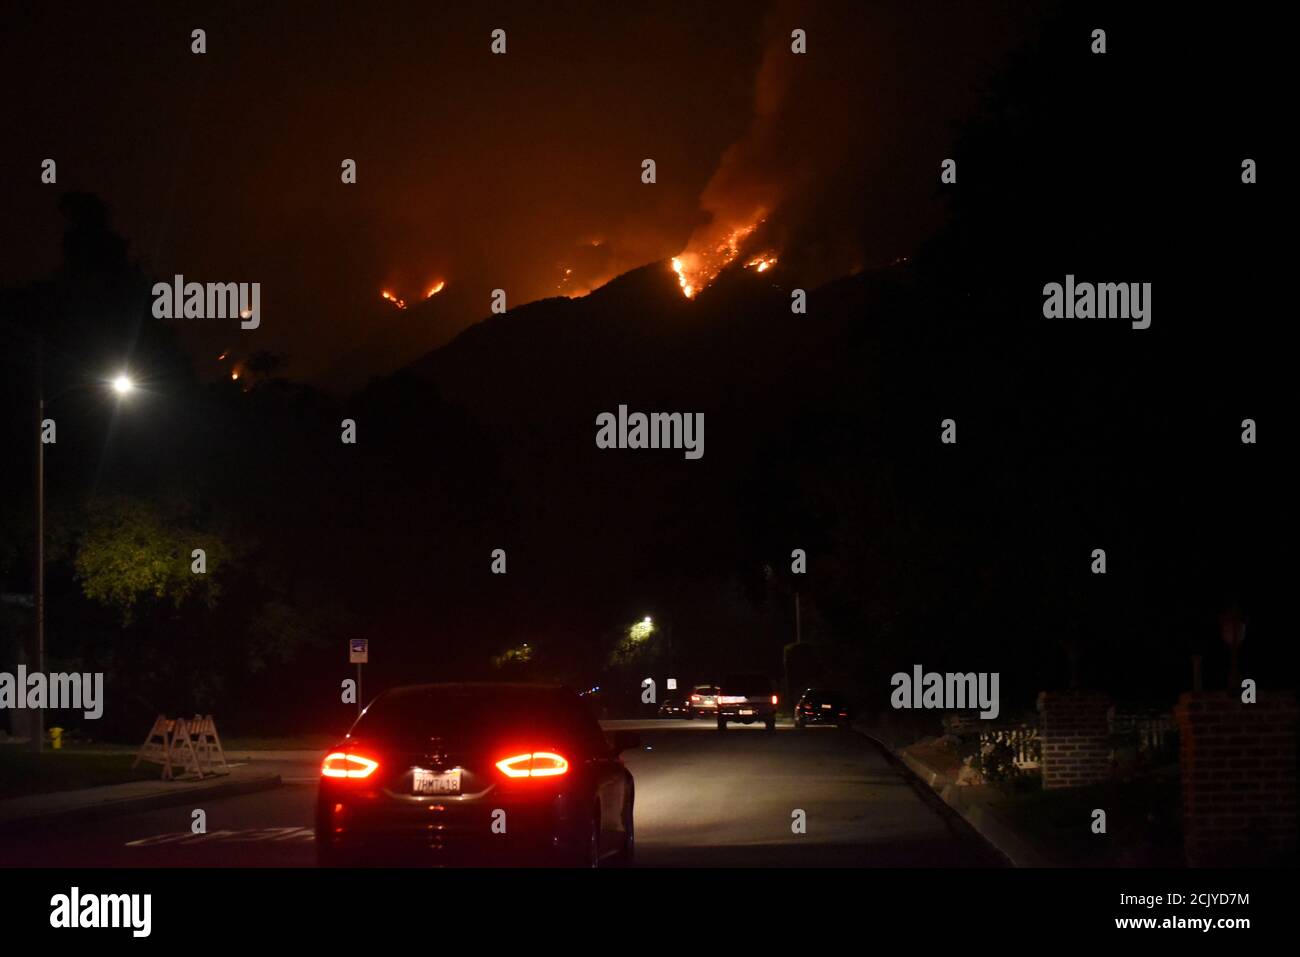 Arcadia, California, USA. 12th Sep, 2020. The Bobcat Fire rages across the hills, as residents below on Highland Oaks Dr. slowly travel up and down their streets in the errie light of a normally dark street. The neighborhood is on standby to evacuate. Stock Photo